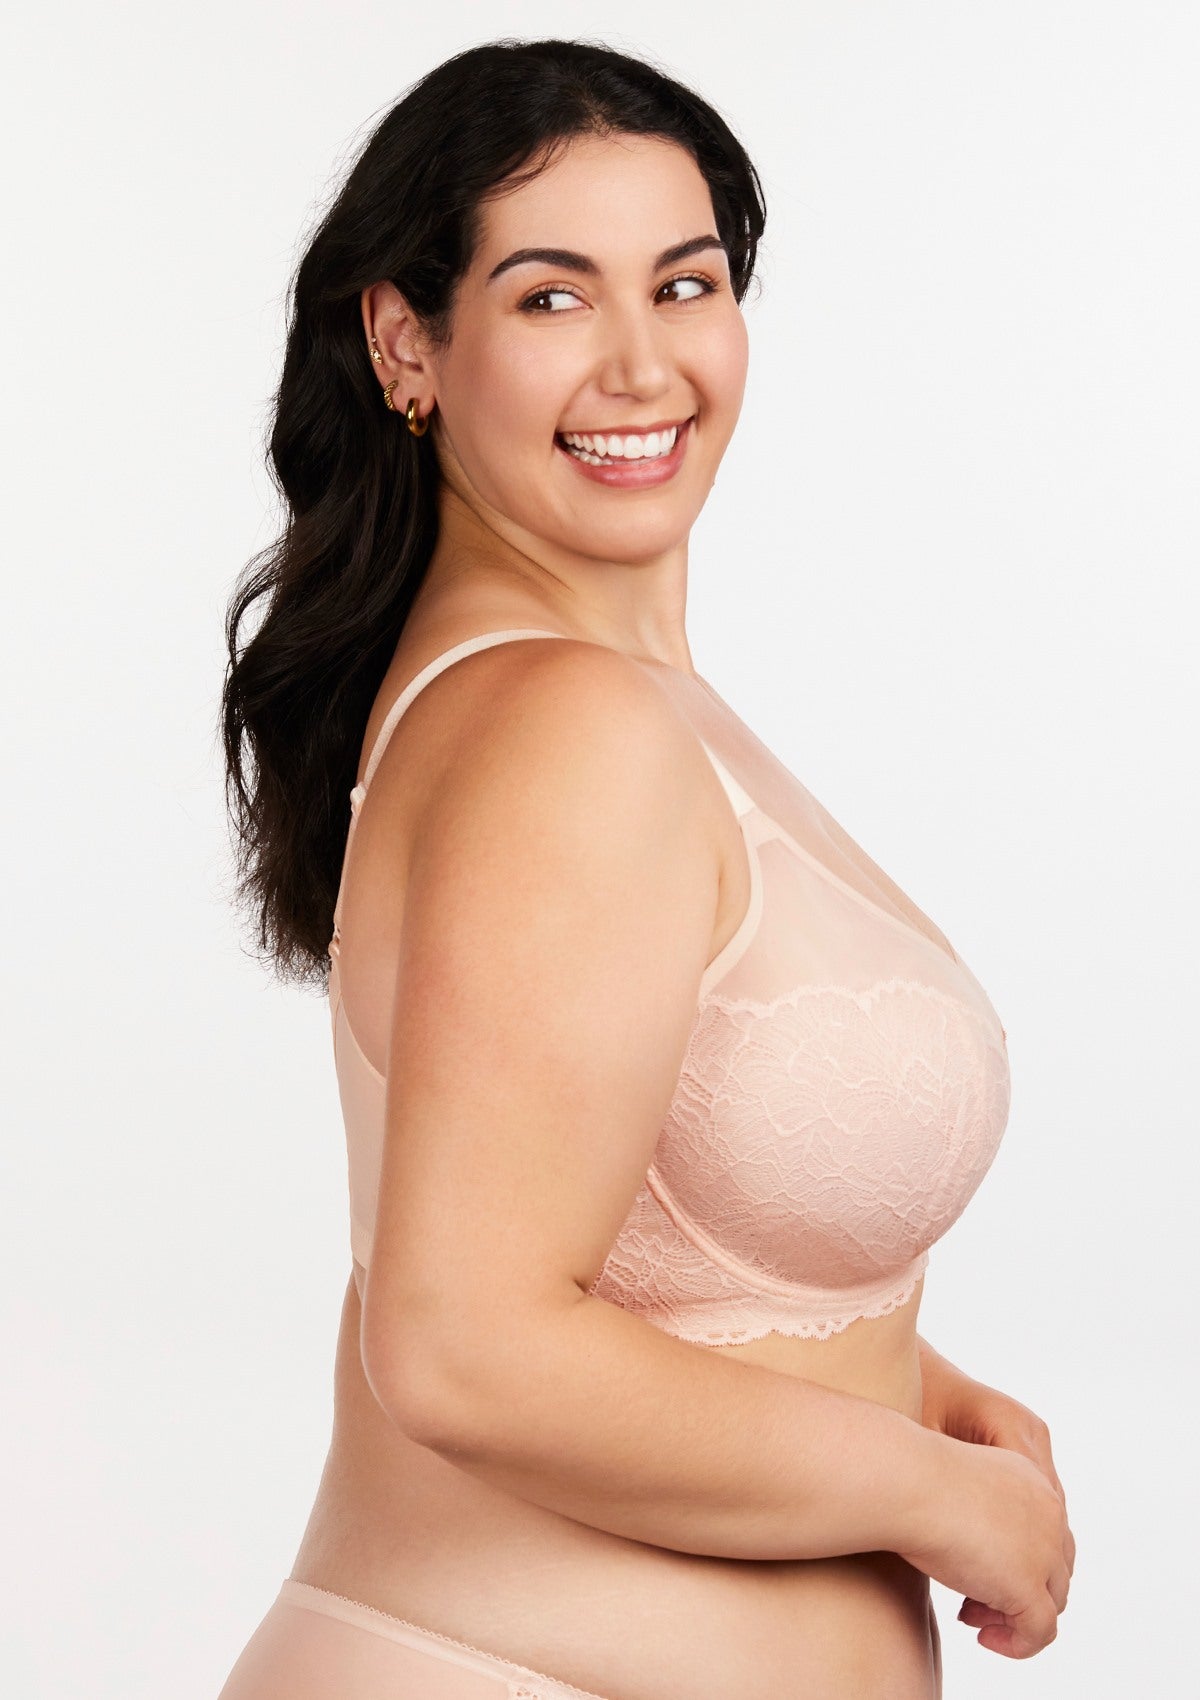 HSIA Blossom Sheer Lace Bra: Comfortable Underwire Bra For Big Busts - White / 44 / H